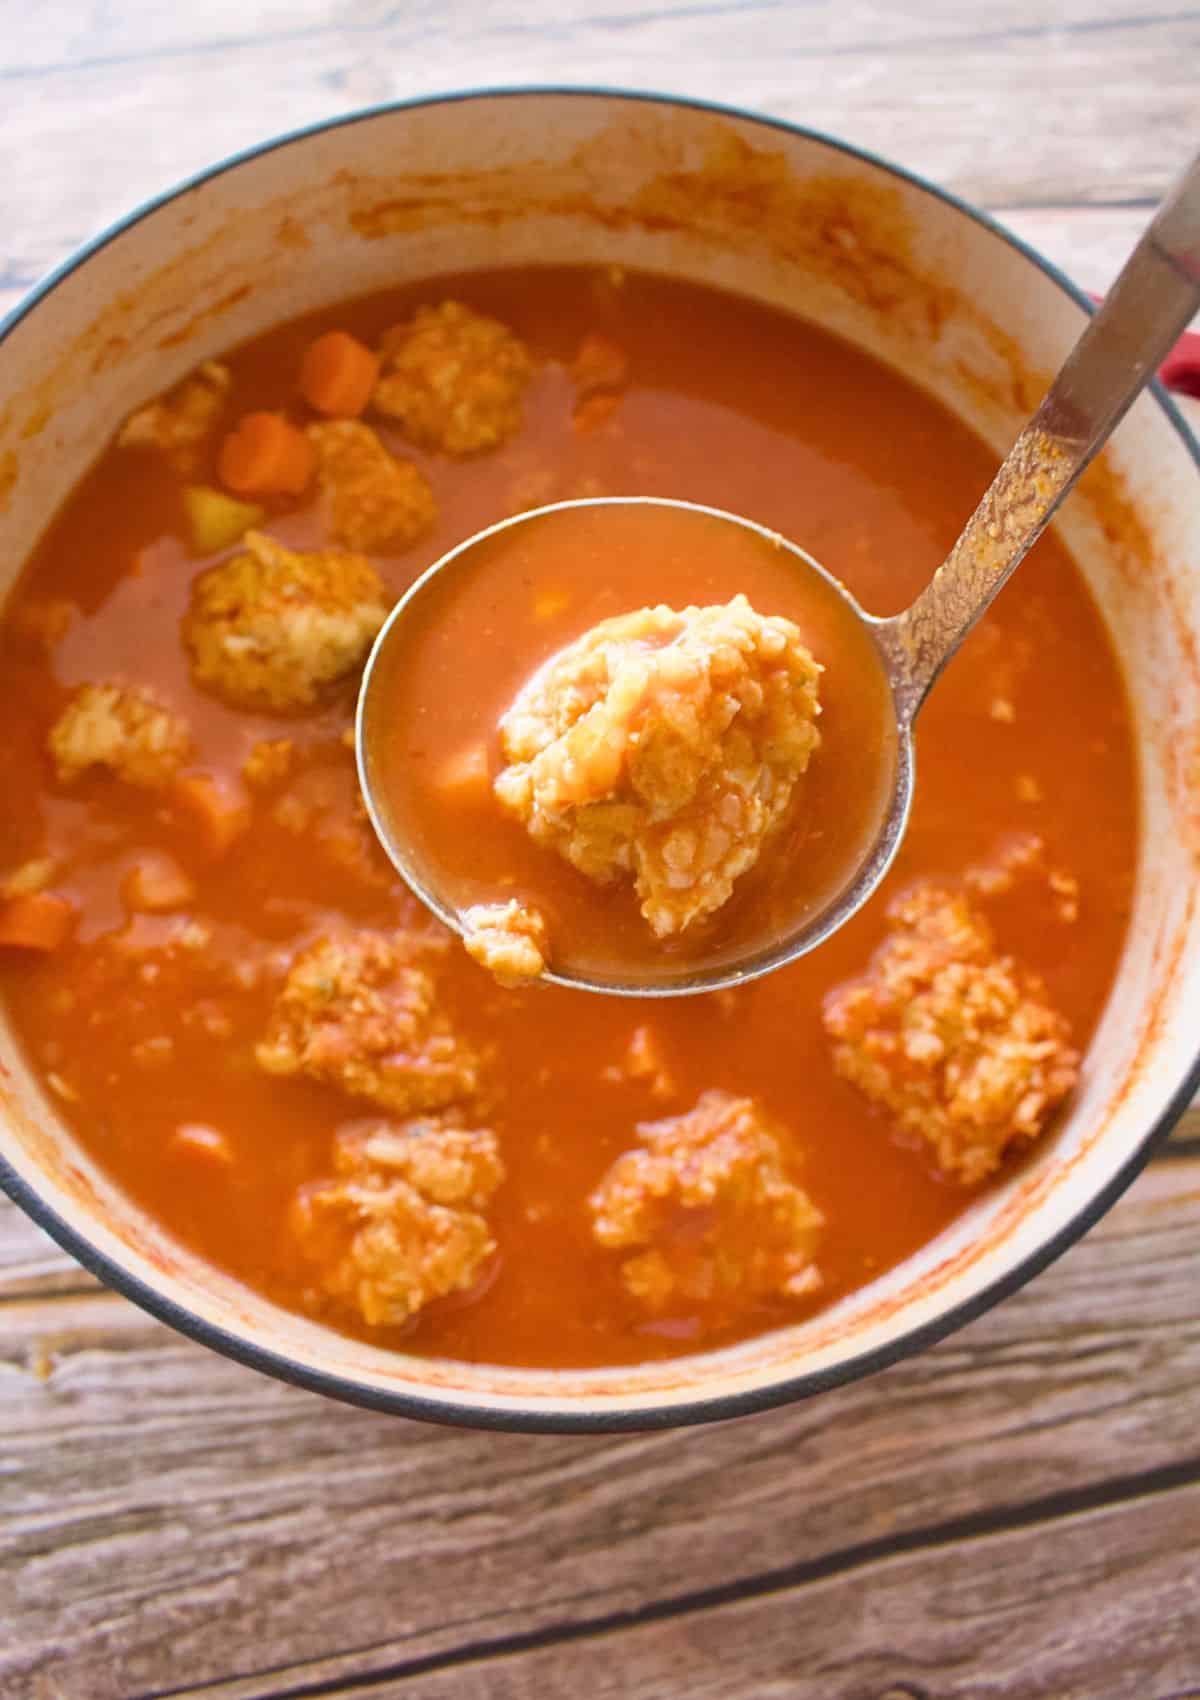 A ladle holding a meatball over a stock pot.